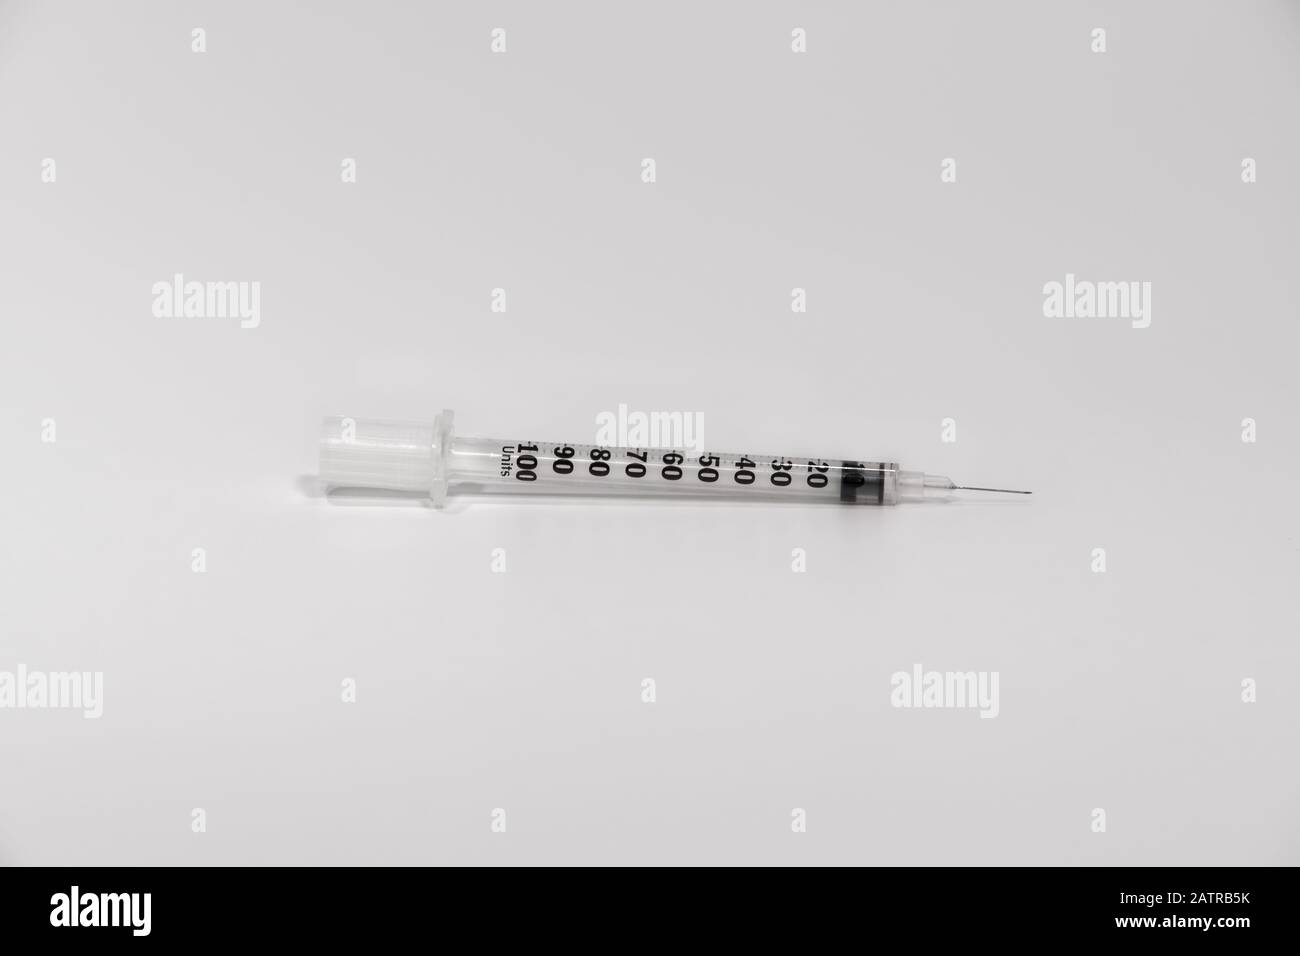 Disposable plastic insulin syringe with a metallic nozzle. Reciprocating pump injection without cup, stainless steel needle & ml units measurement. Stock Photo